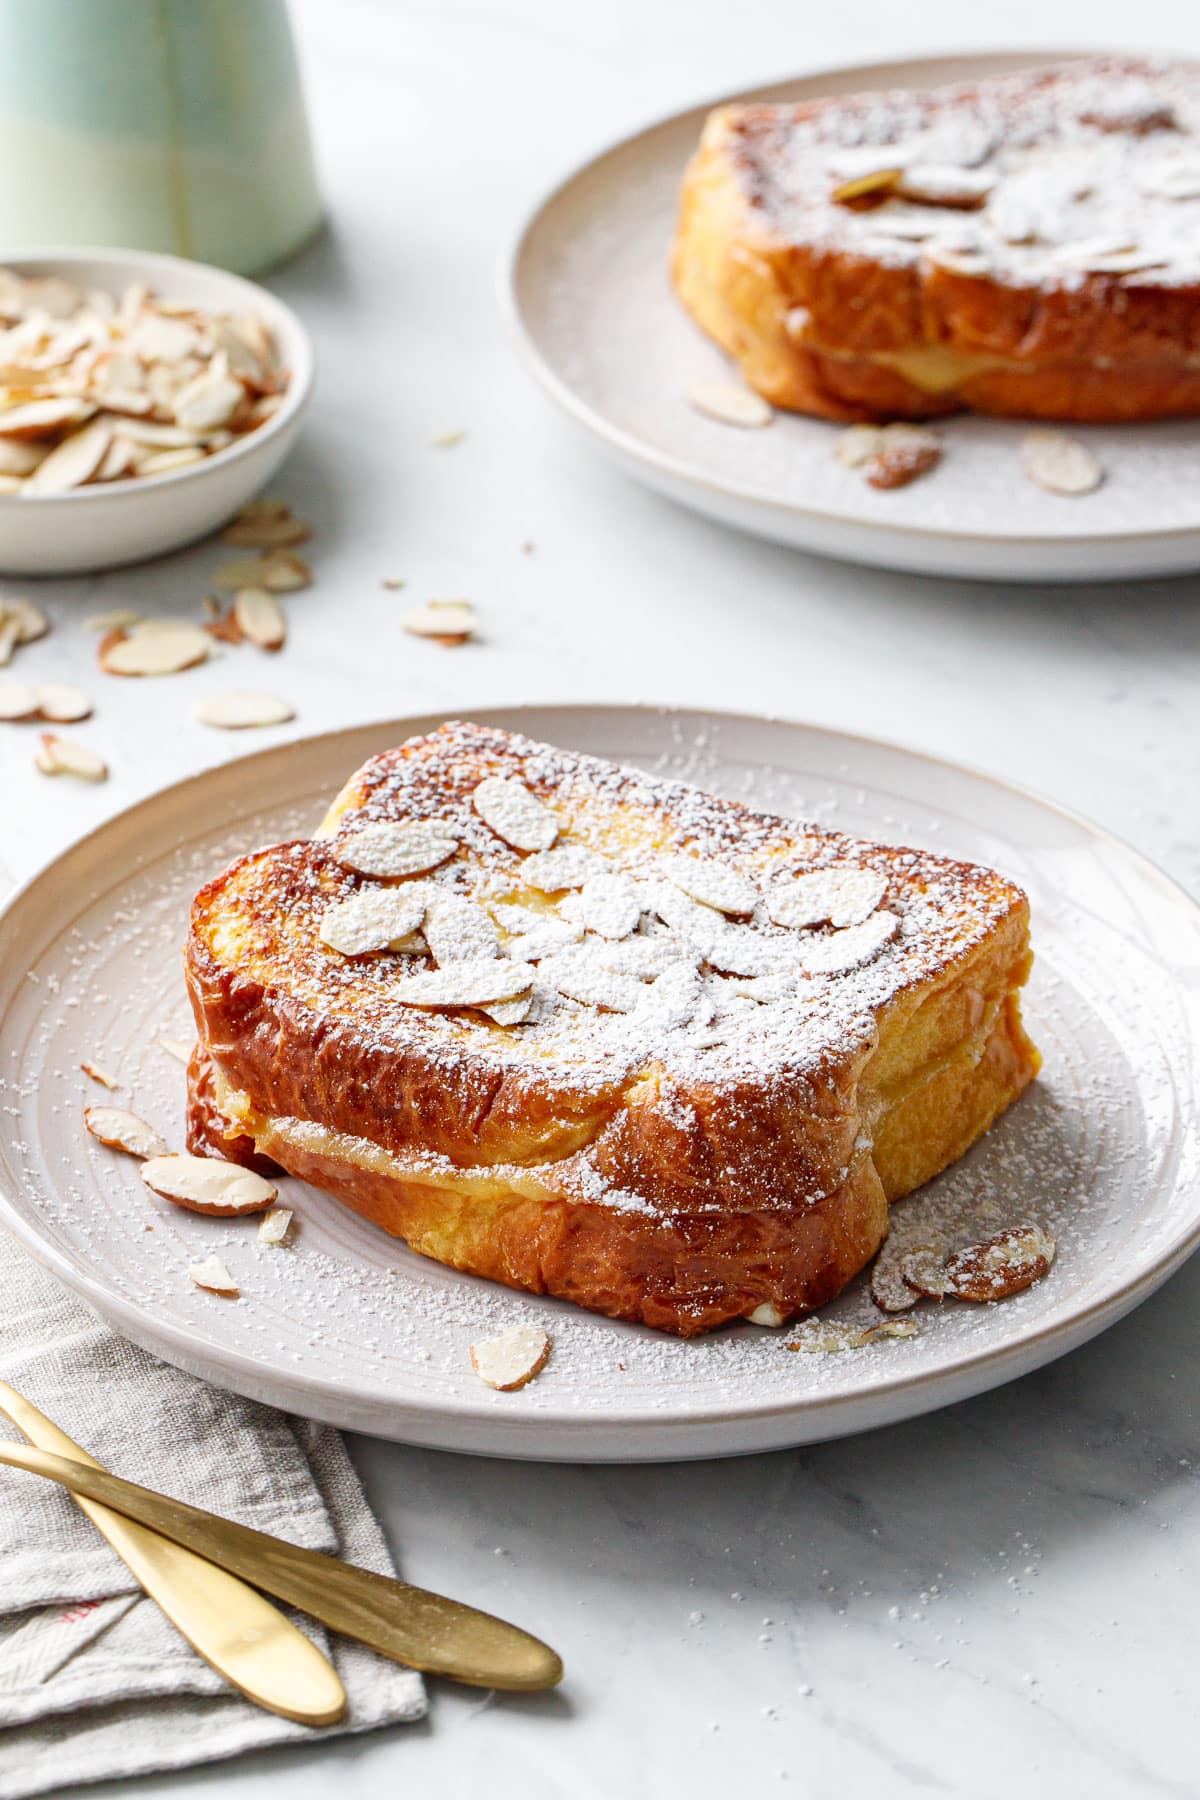 Two plates with Marzipan-Stuffed French Toast, topped with almonds and dusted with powdered sugar.